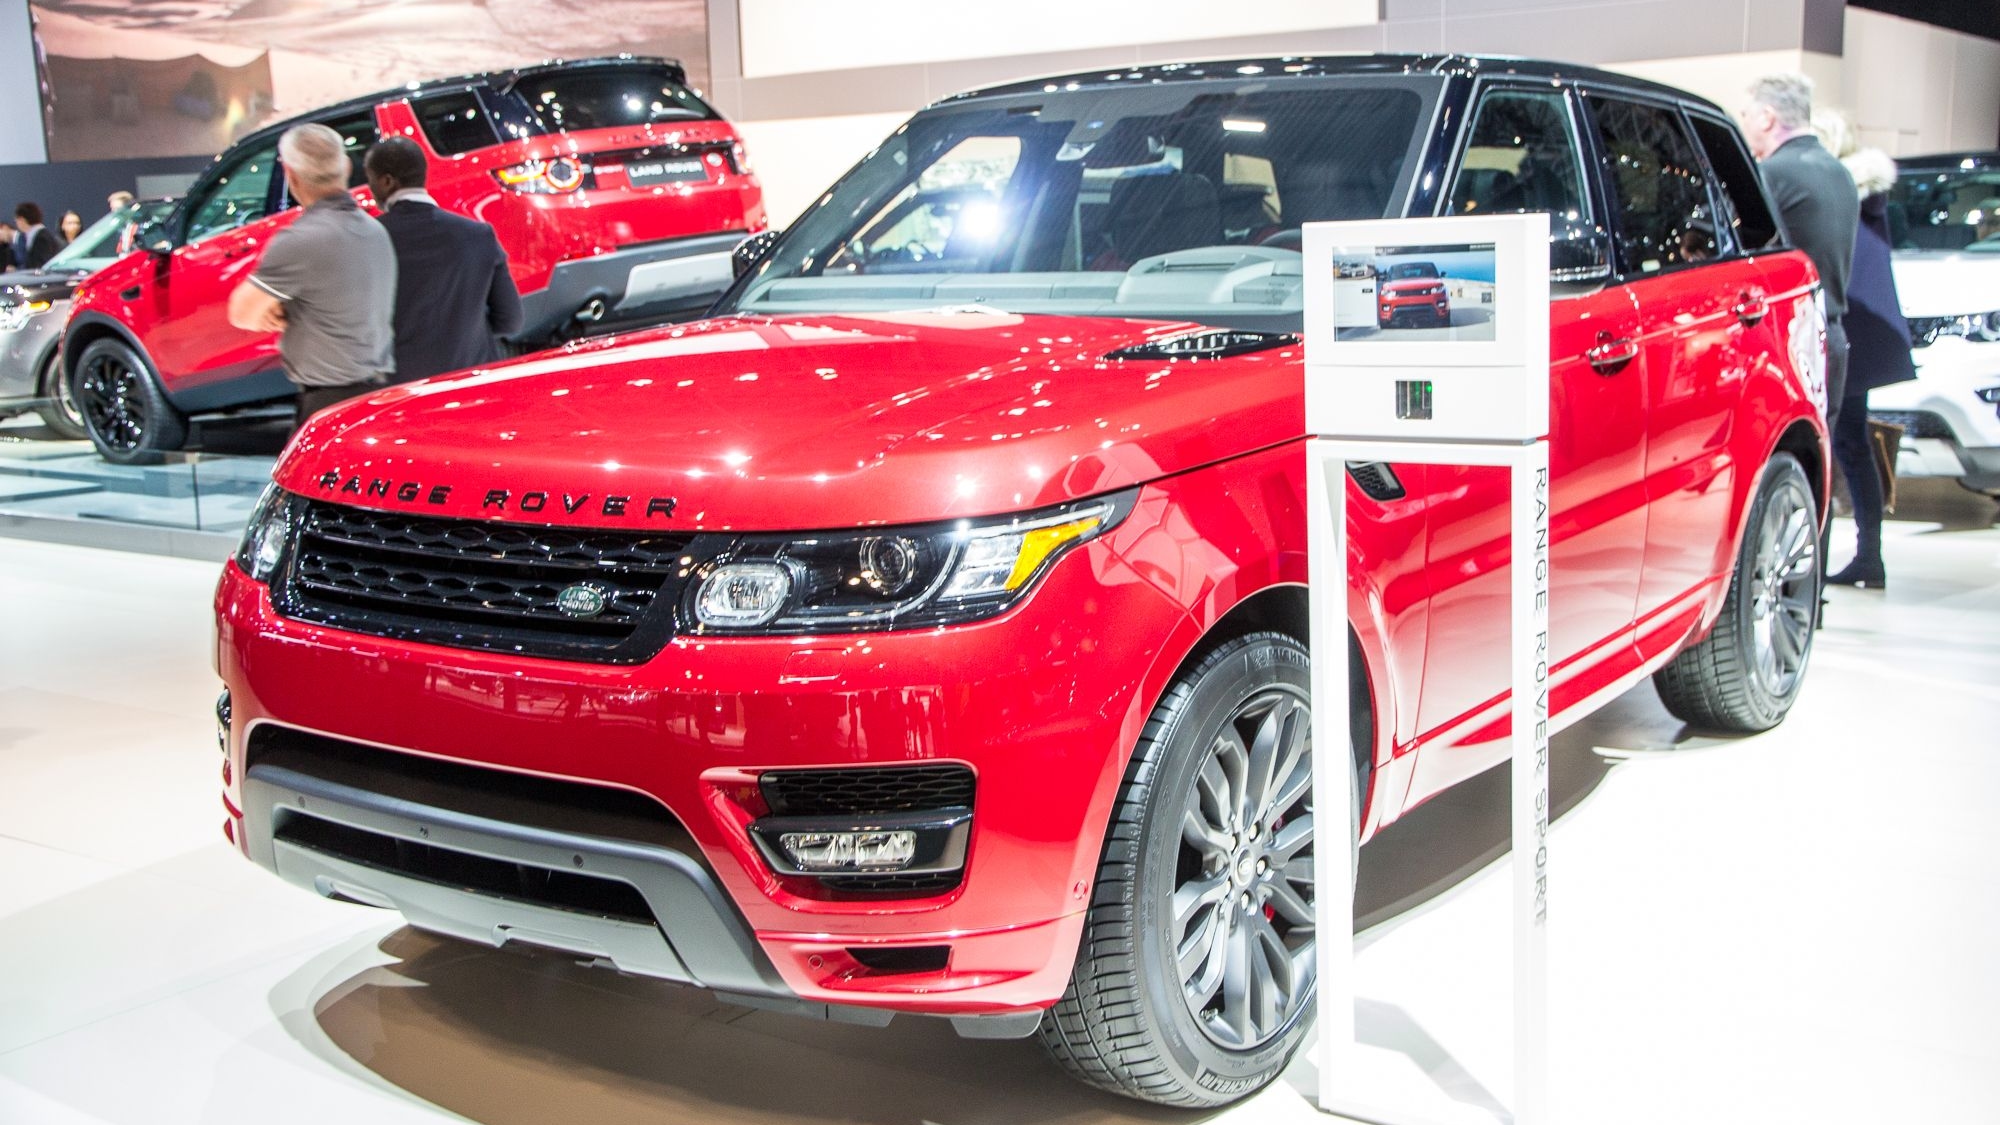 2016 Range Rover Sport HST Limited Edition, 2015 New York Auto Show